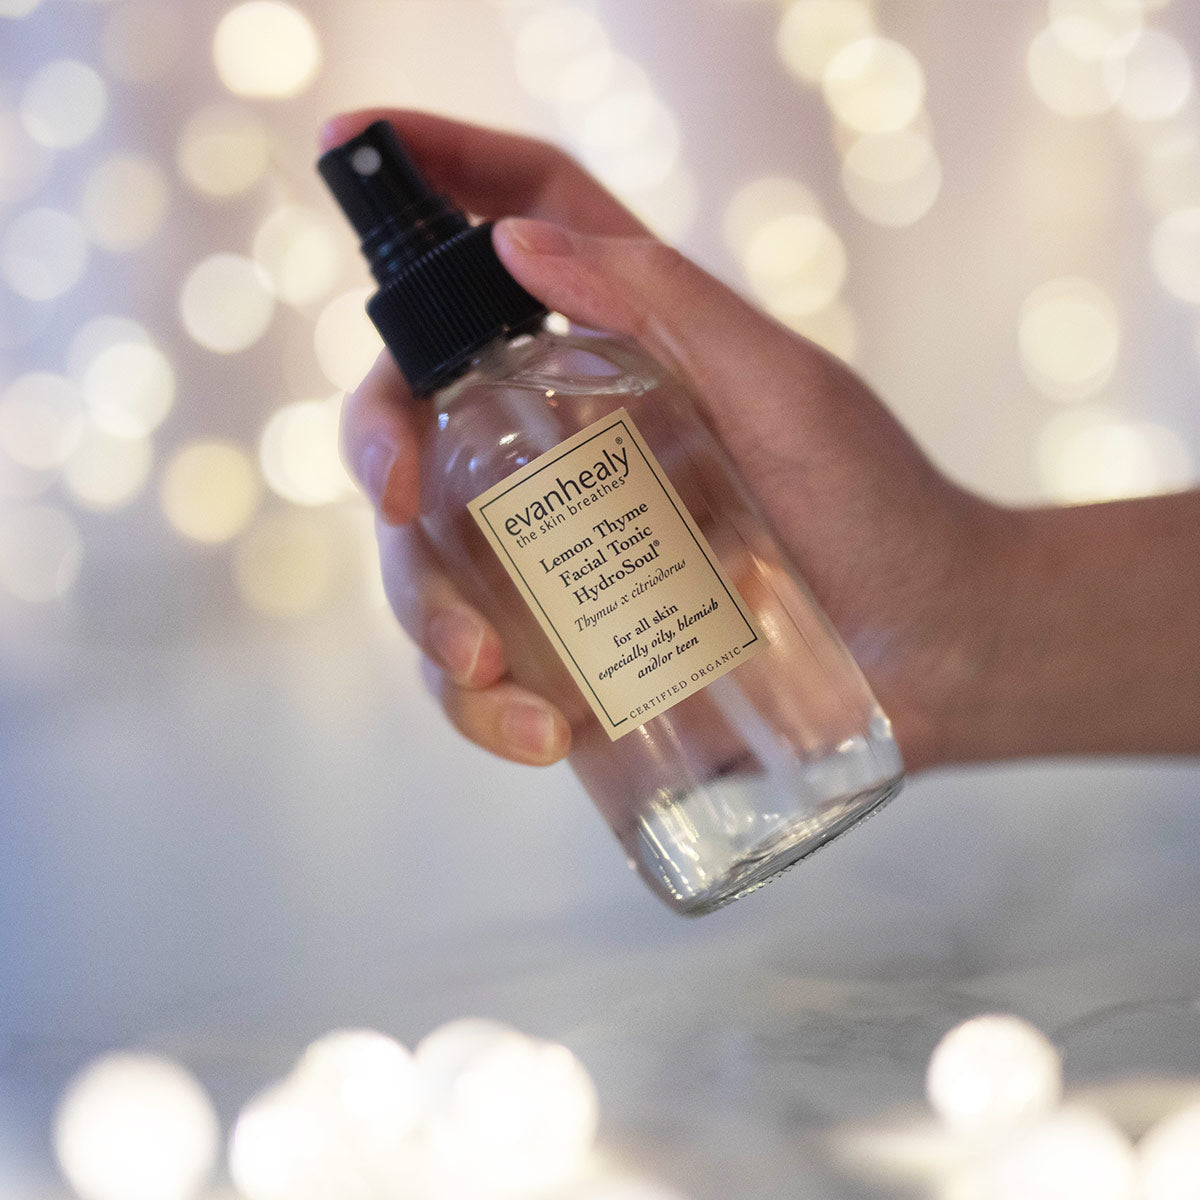 copper distilled lemon thyme hydrosol facial toner in hand with twinkling lights